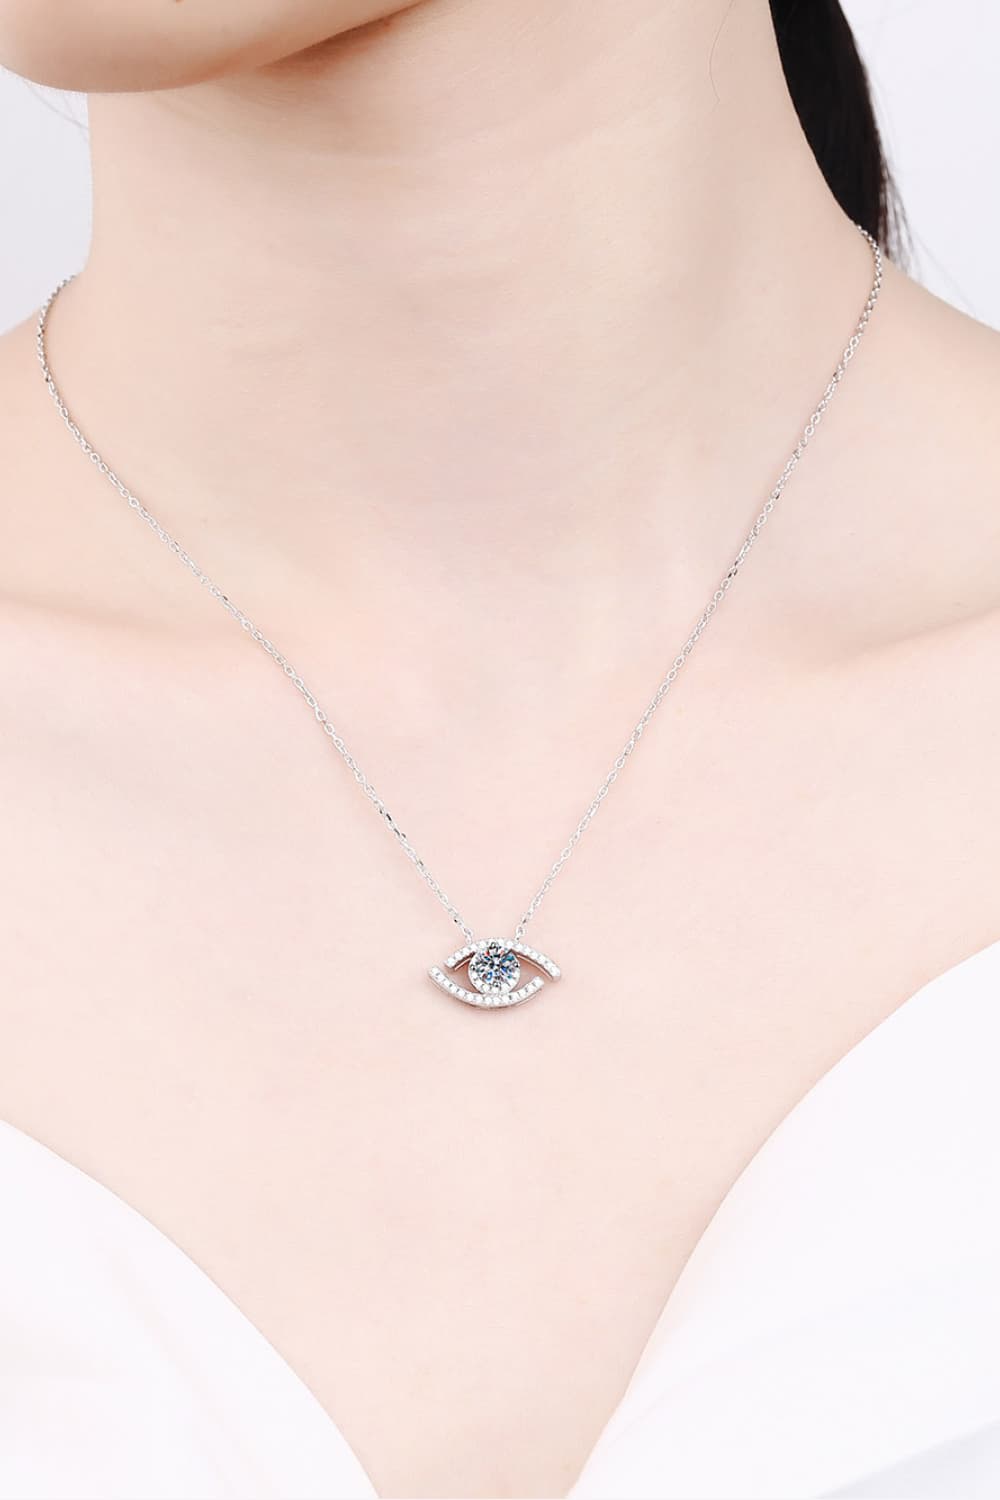 Antique White Moissanite Evil Eye Pendant 925 Sterling Silver Necklace Sentient Beauty Fashions jewelry